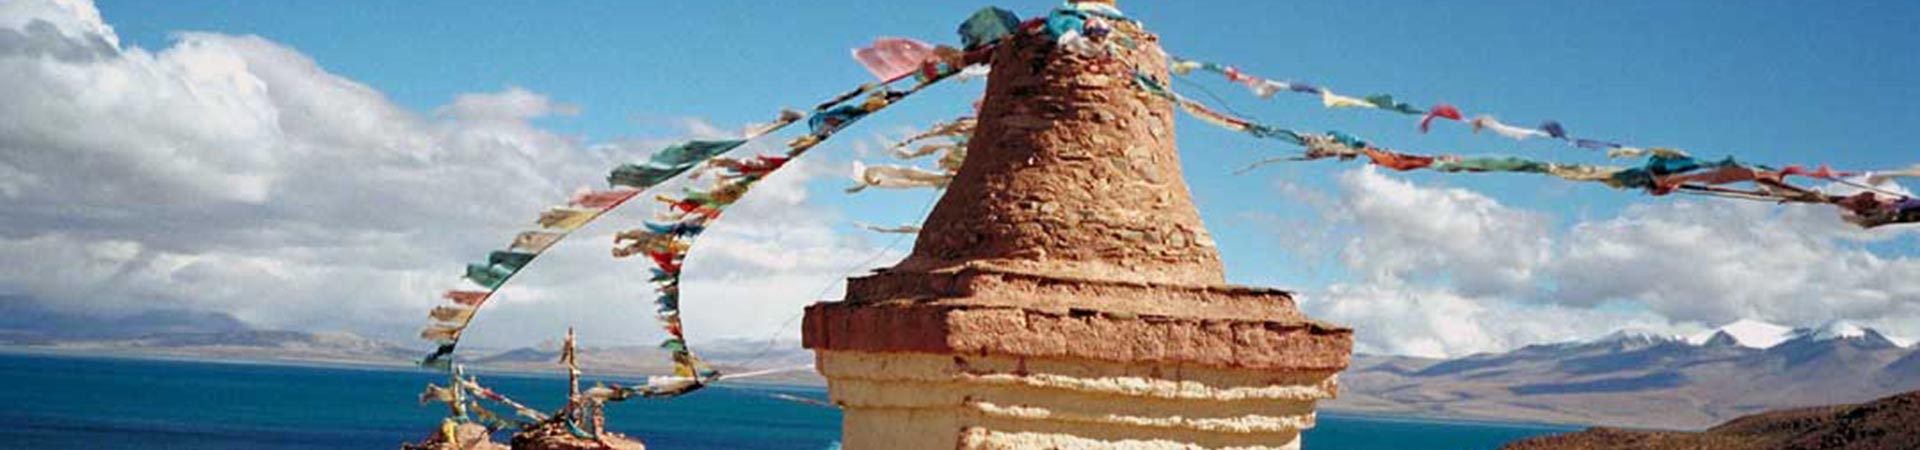 Prayer flags and monument on the mountain